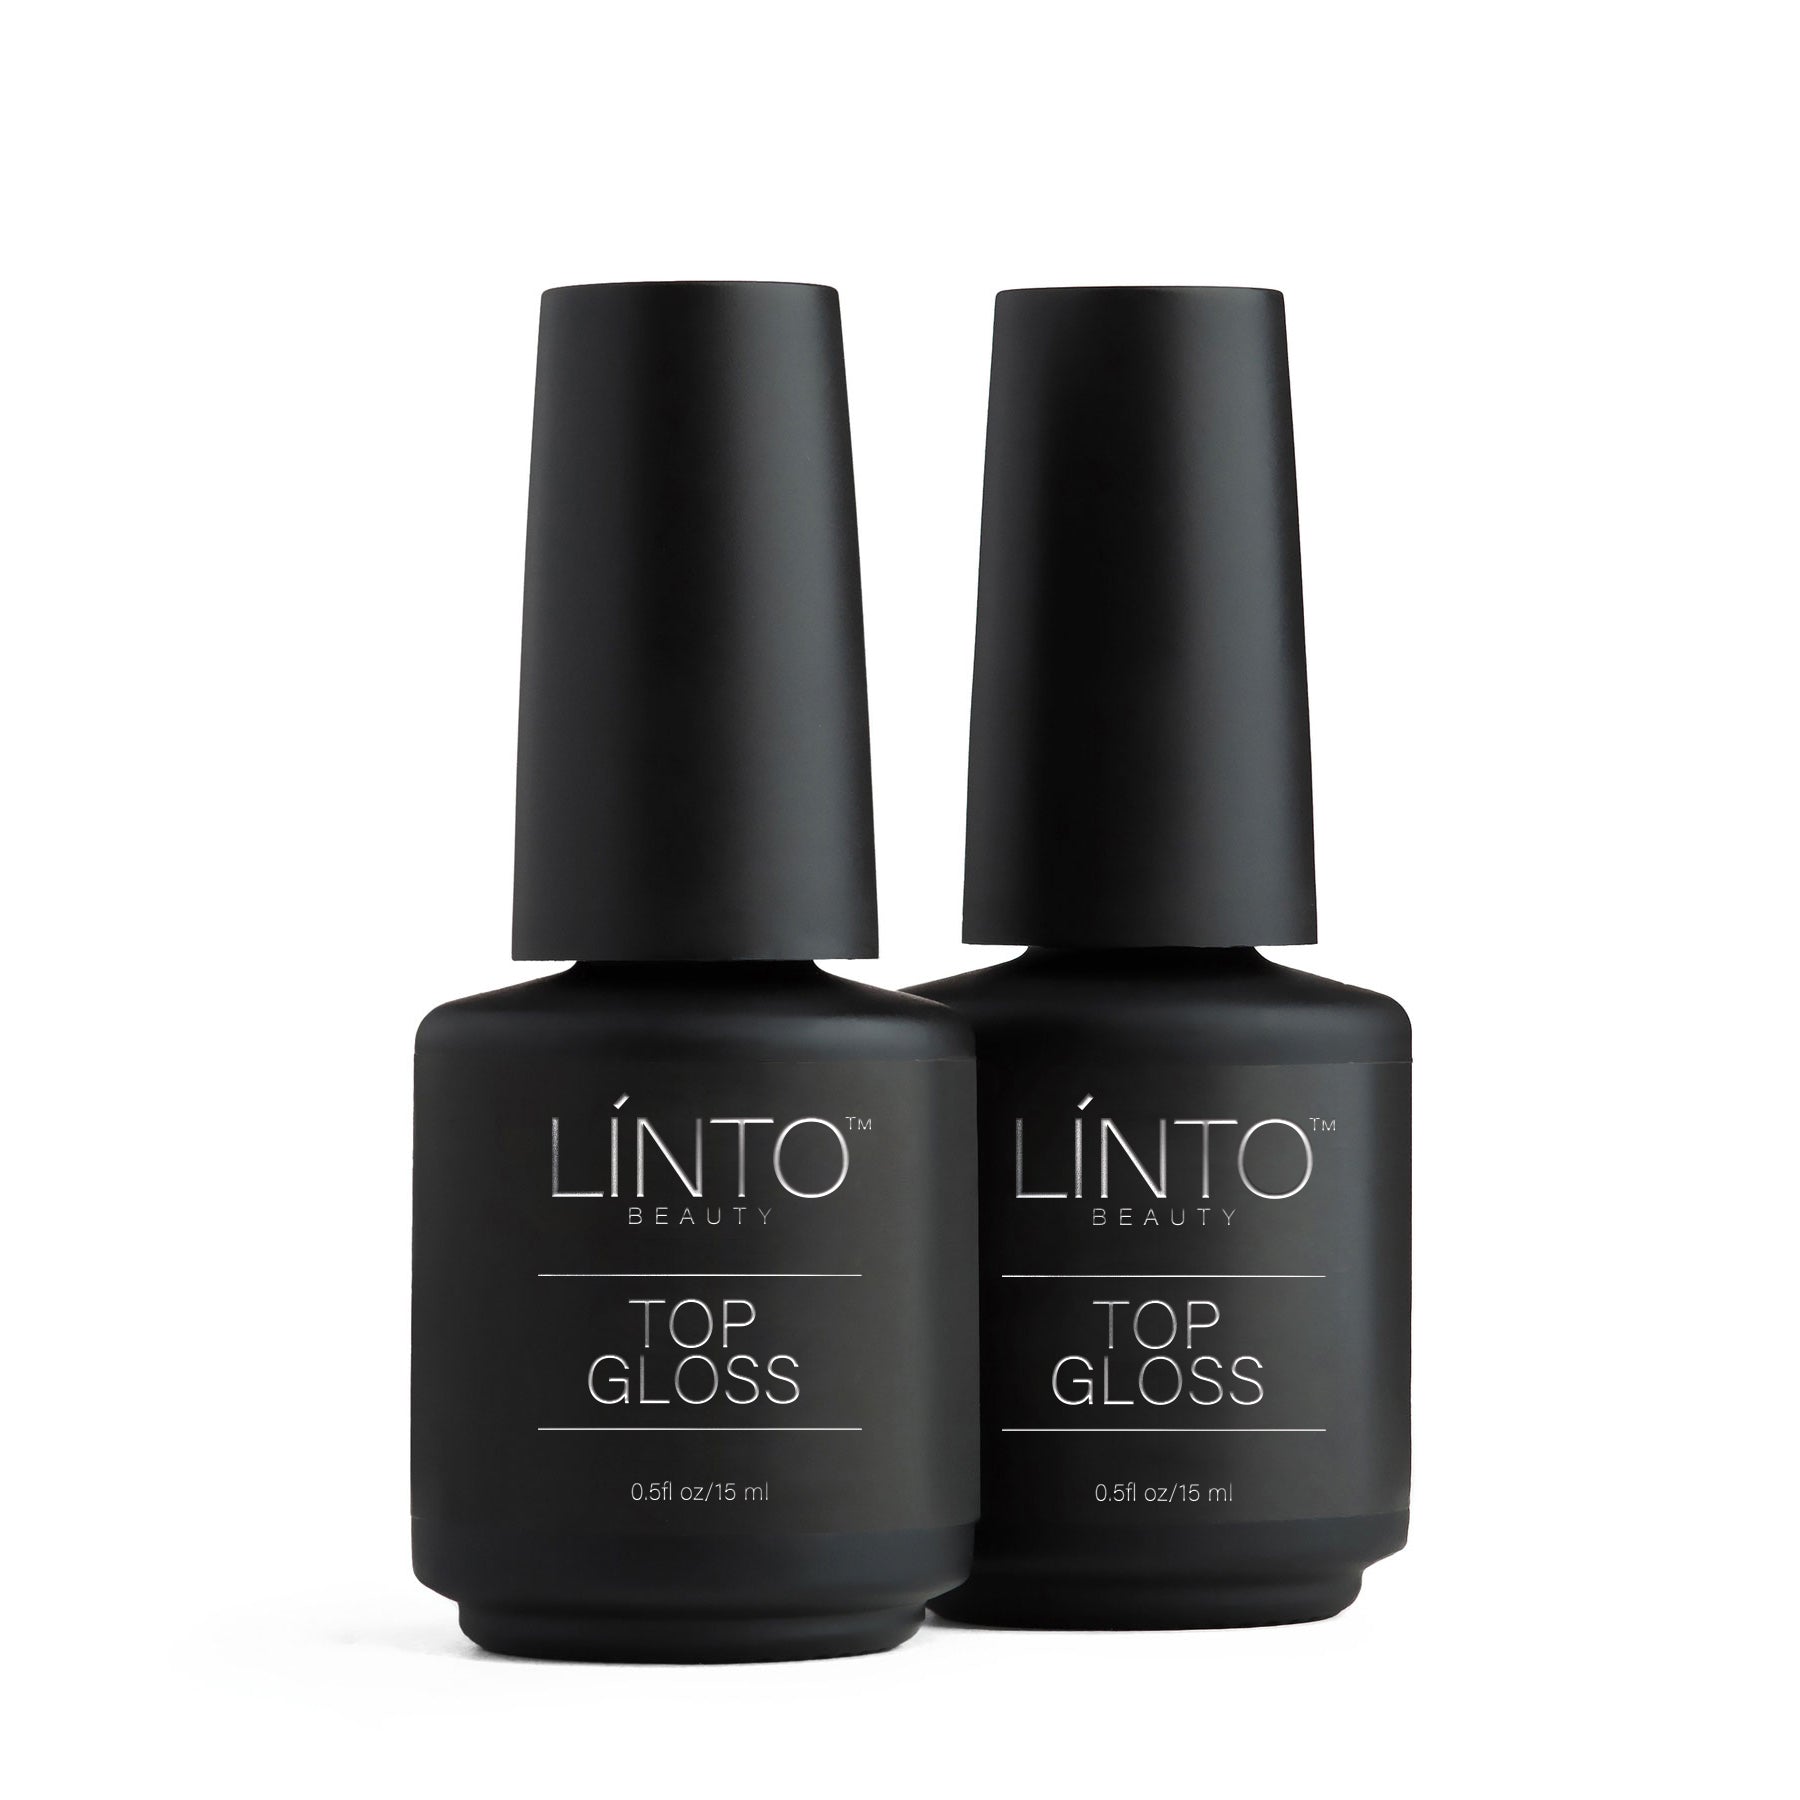 Top gloss 15 ml by LiNTO